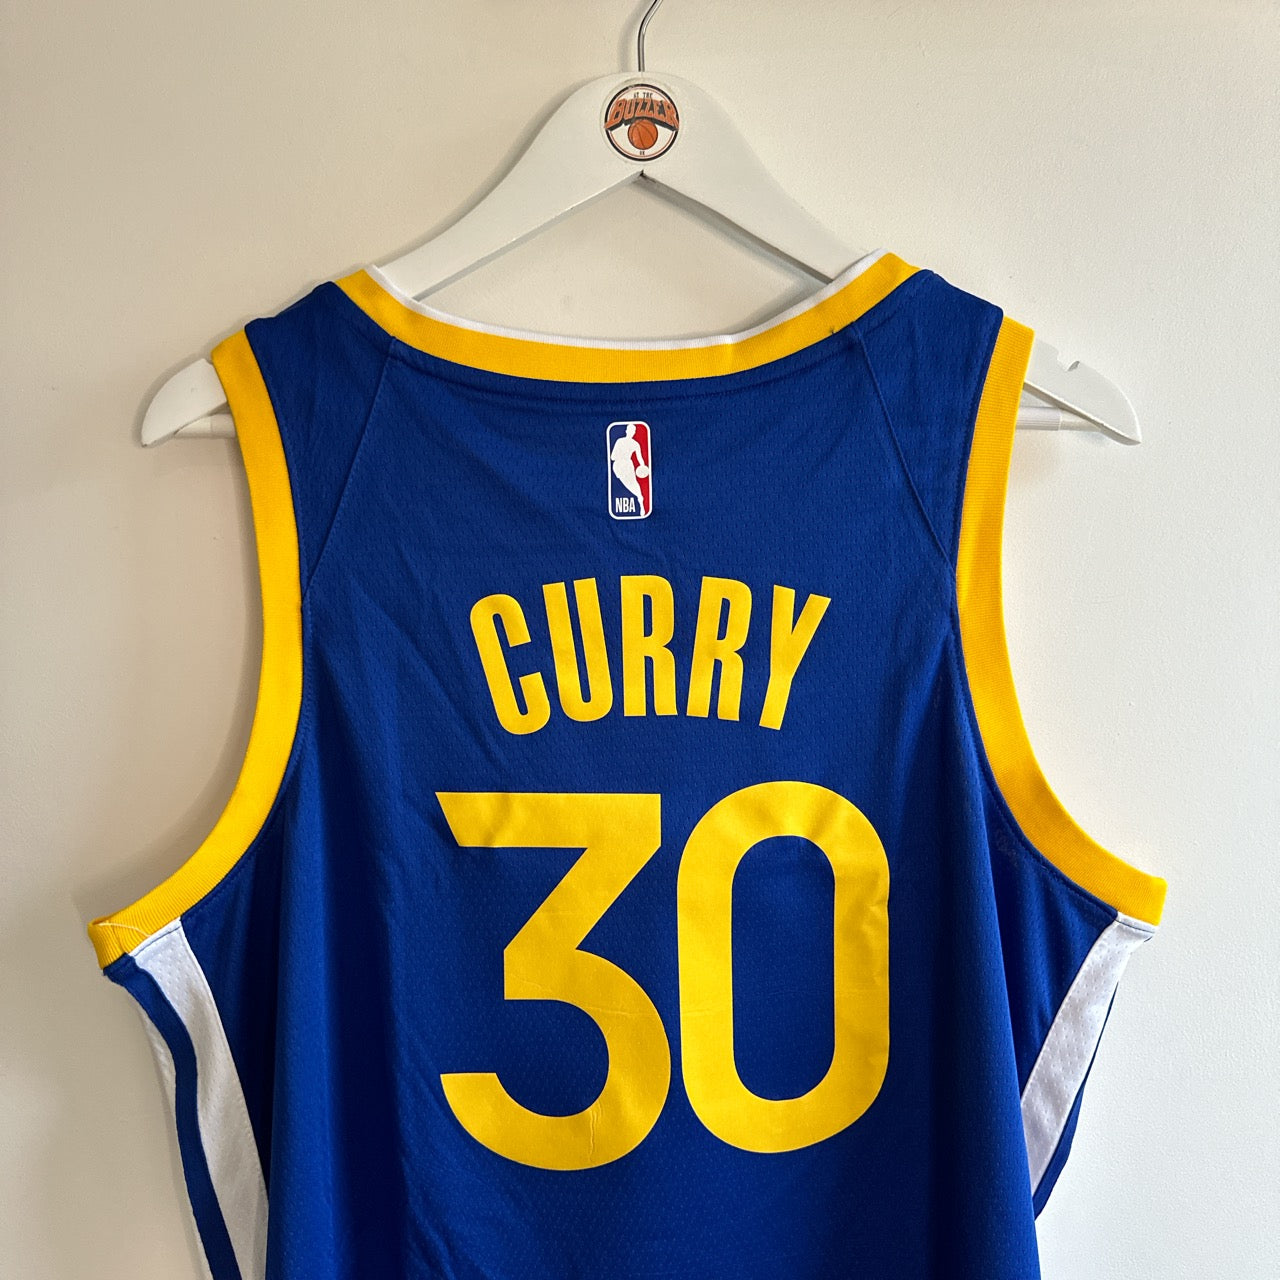 Golden State Warriors Steph Curry Nike jersey - Large